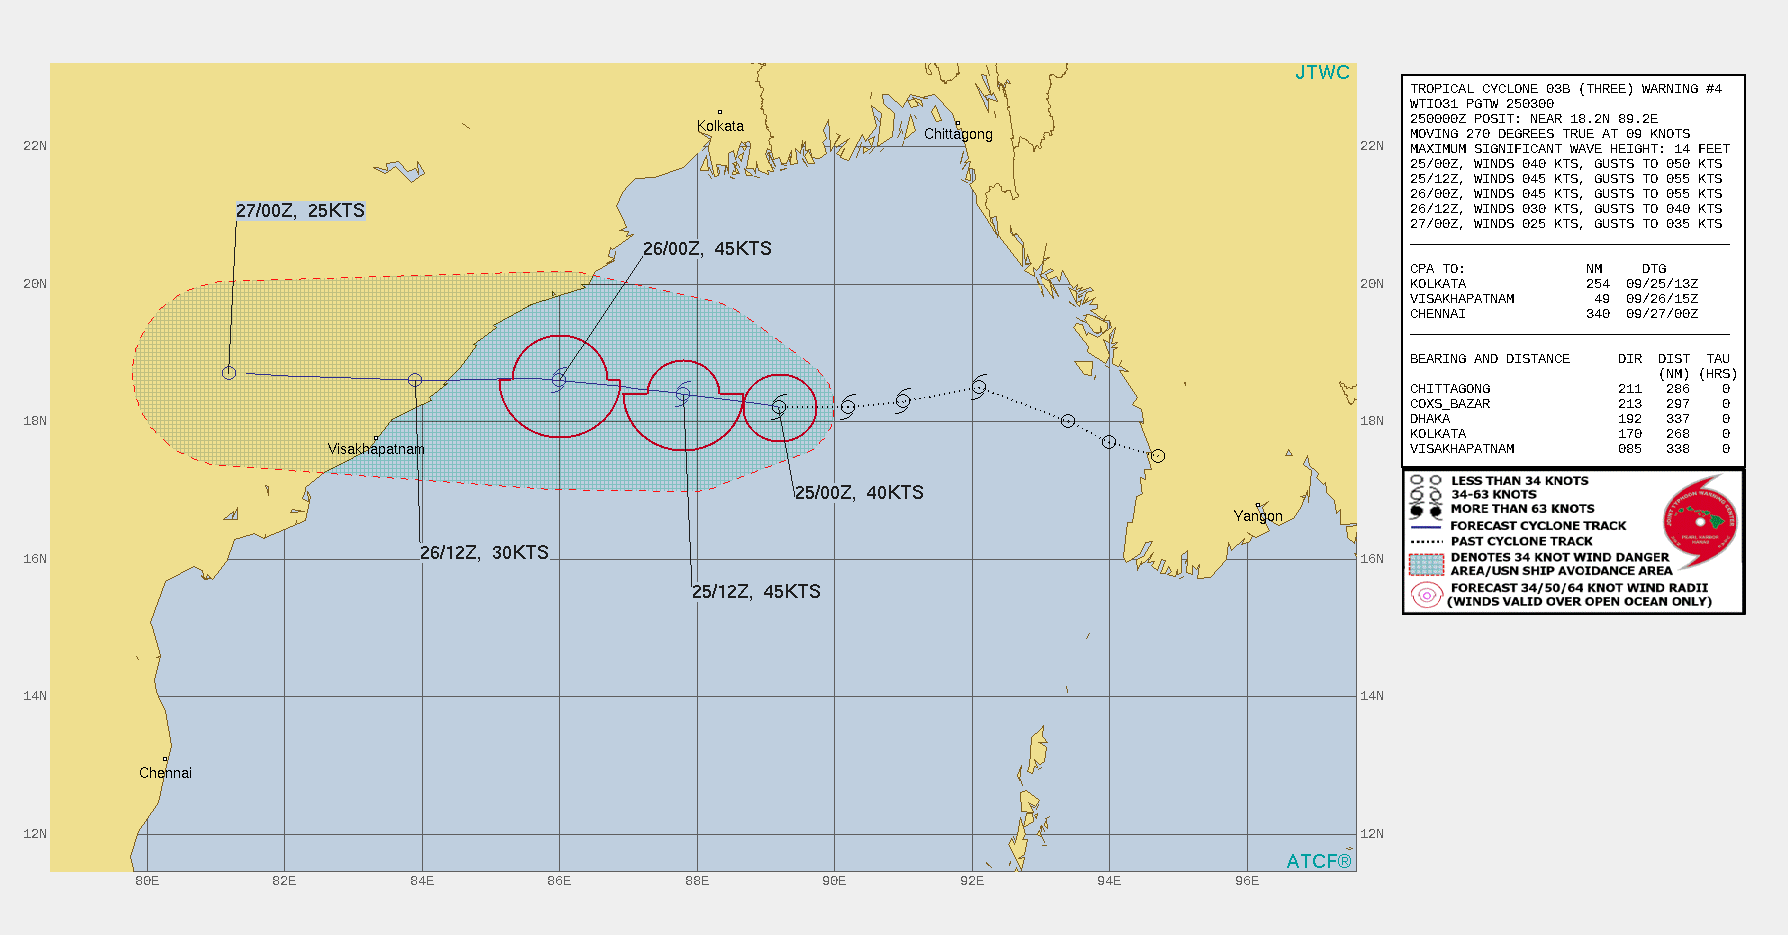 SIGNIFICANT FORECAST CHANGES: THERE ARE NO SIGNIFICANT CHANGES TO THE FORECAST FROM THE PREVIOUS WARNING.  FORECAST DISCUSSION: TROPICAL CYCLONE 03B IS EXPECTED TO TRACK STEADILY WESTWARD THROUGH A CONSISTENT ENVIRONMENT CHARACTERIZED BY WARM SEAS AND LIGHT TO MODERATE VERTICAL WIND SHEAR. IT WILL INTENSIFY SLIGHTLY DURING THE NEXT 24 HOURS BEFORE ENCOUTNERING INCREASING NORTHEASTERLY SHEAR PRIOR TO LANDFALL.